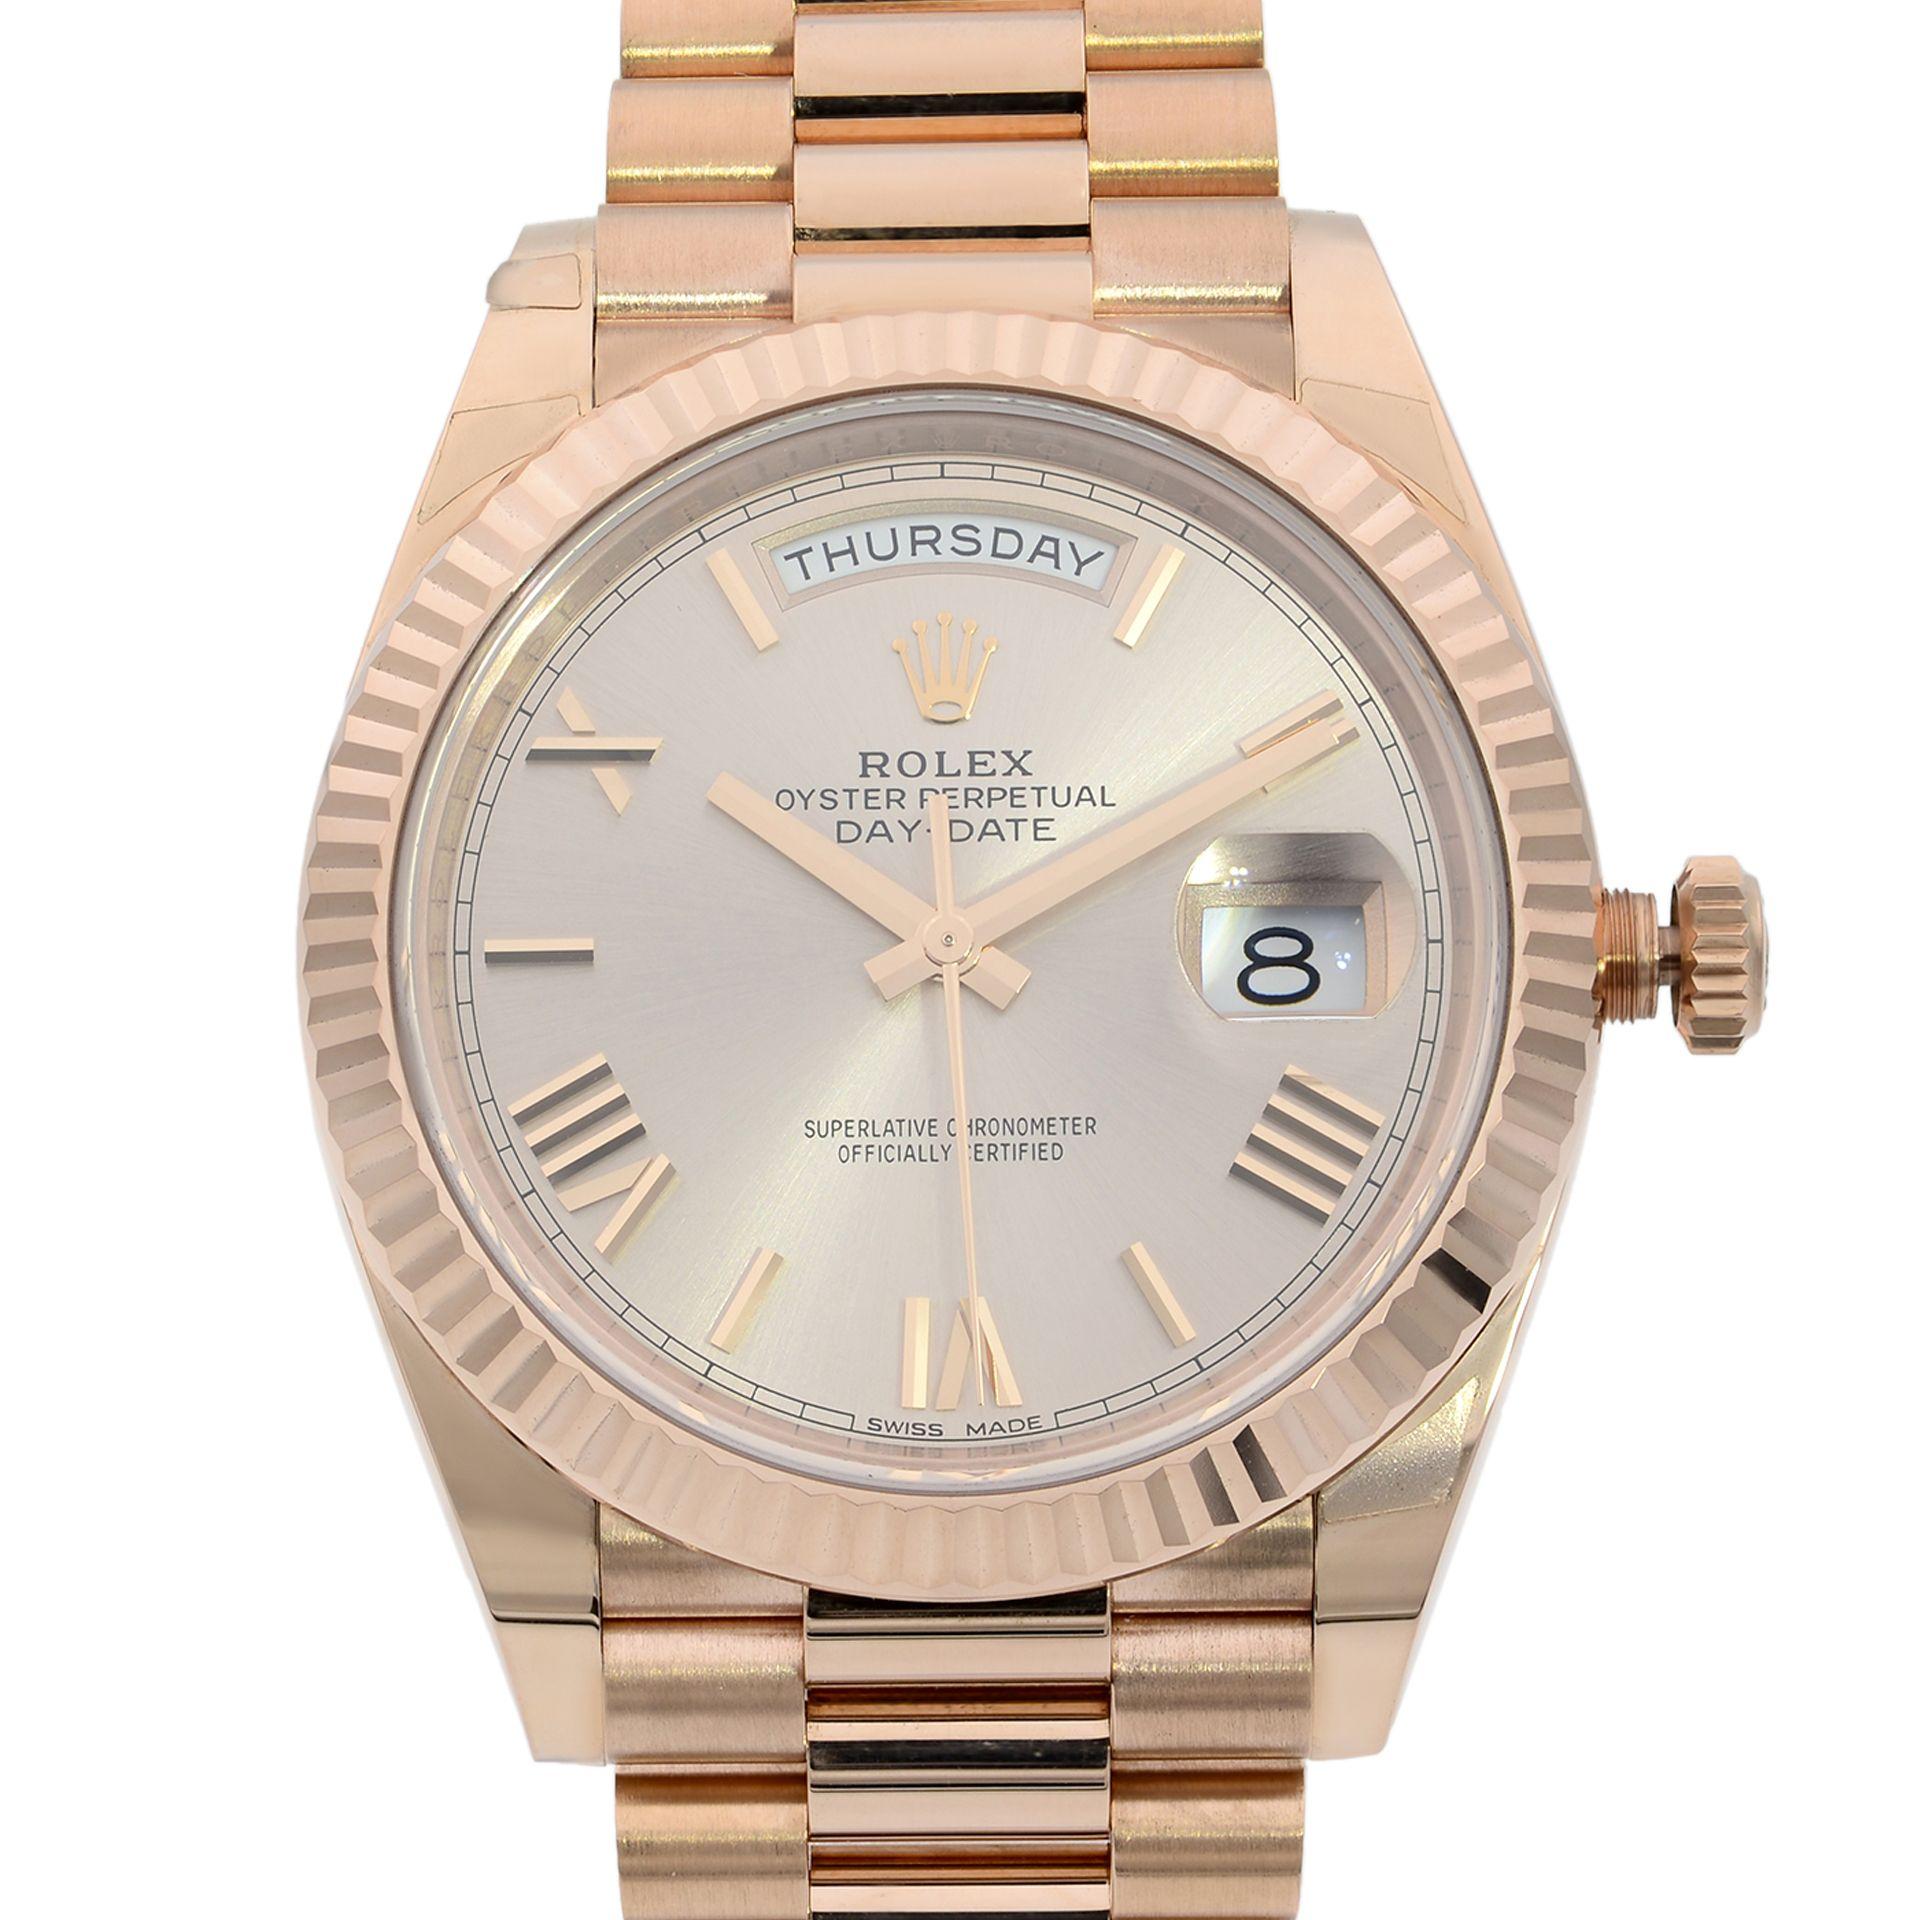 This brand new Rolex Day-Date 228235SNRP is a beautiful men's timepiece that is powered by a mechanical (automatic) movement which is cased in a rose gold case. It has a round shape face, day & date dial, and has hand roman numerals style markers.